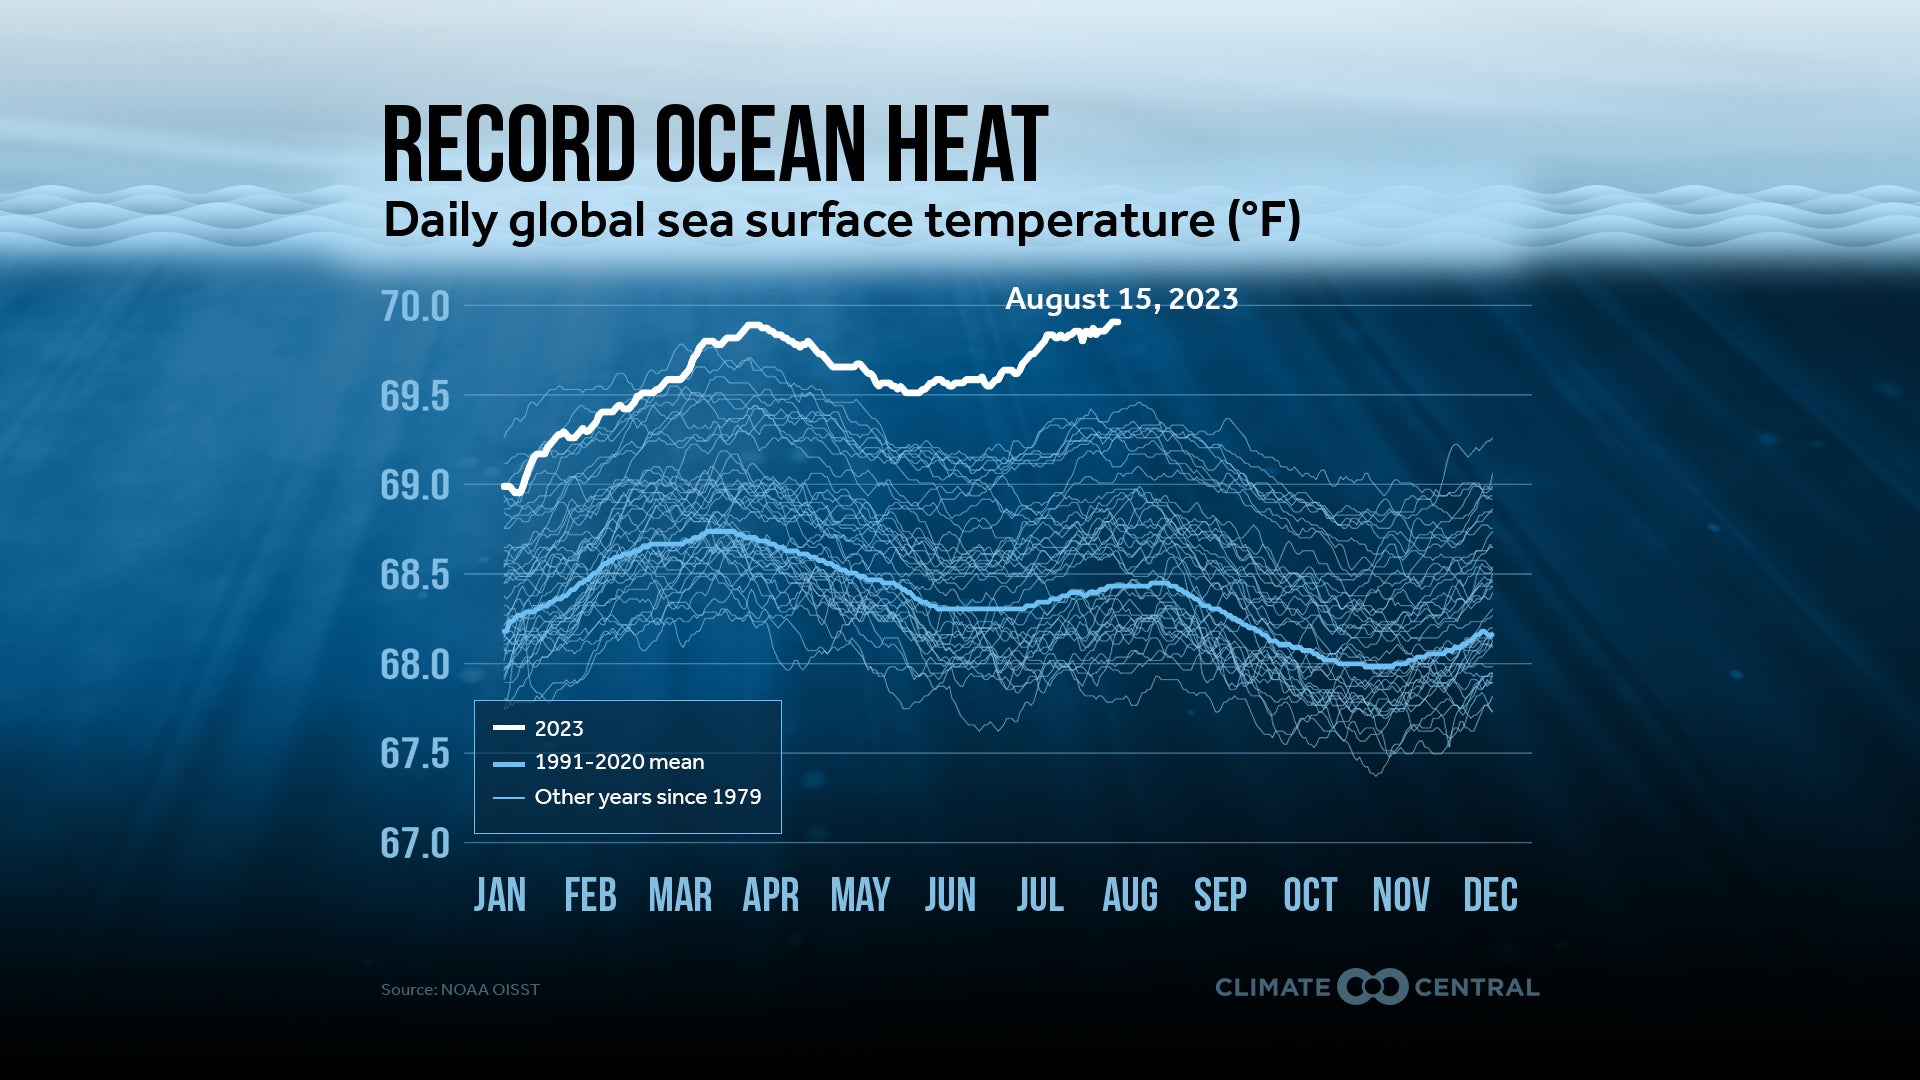 2023 recorded the highest increase in sea surface temperatures